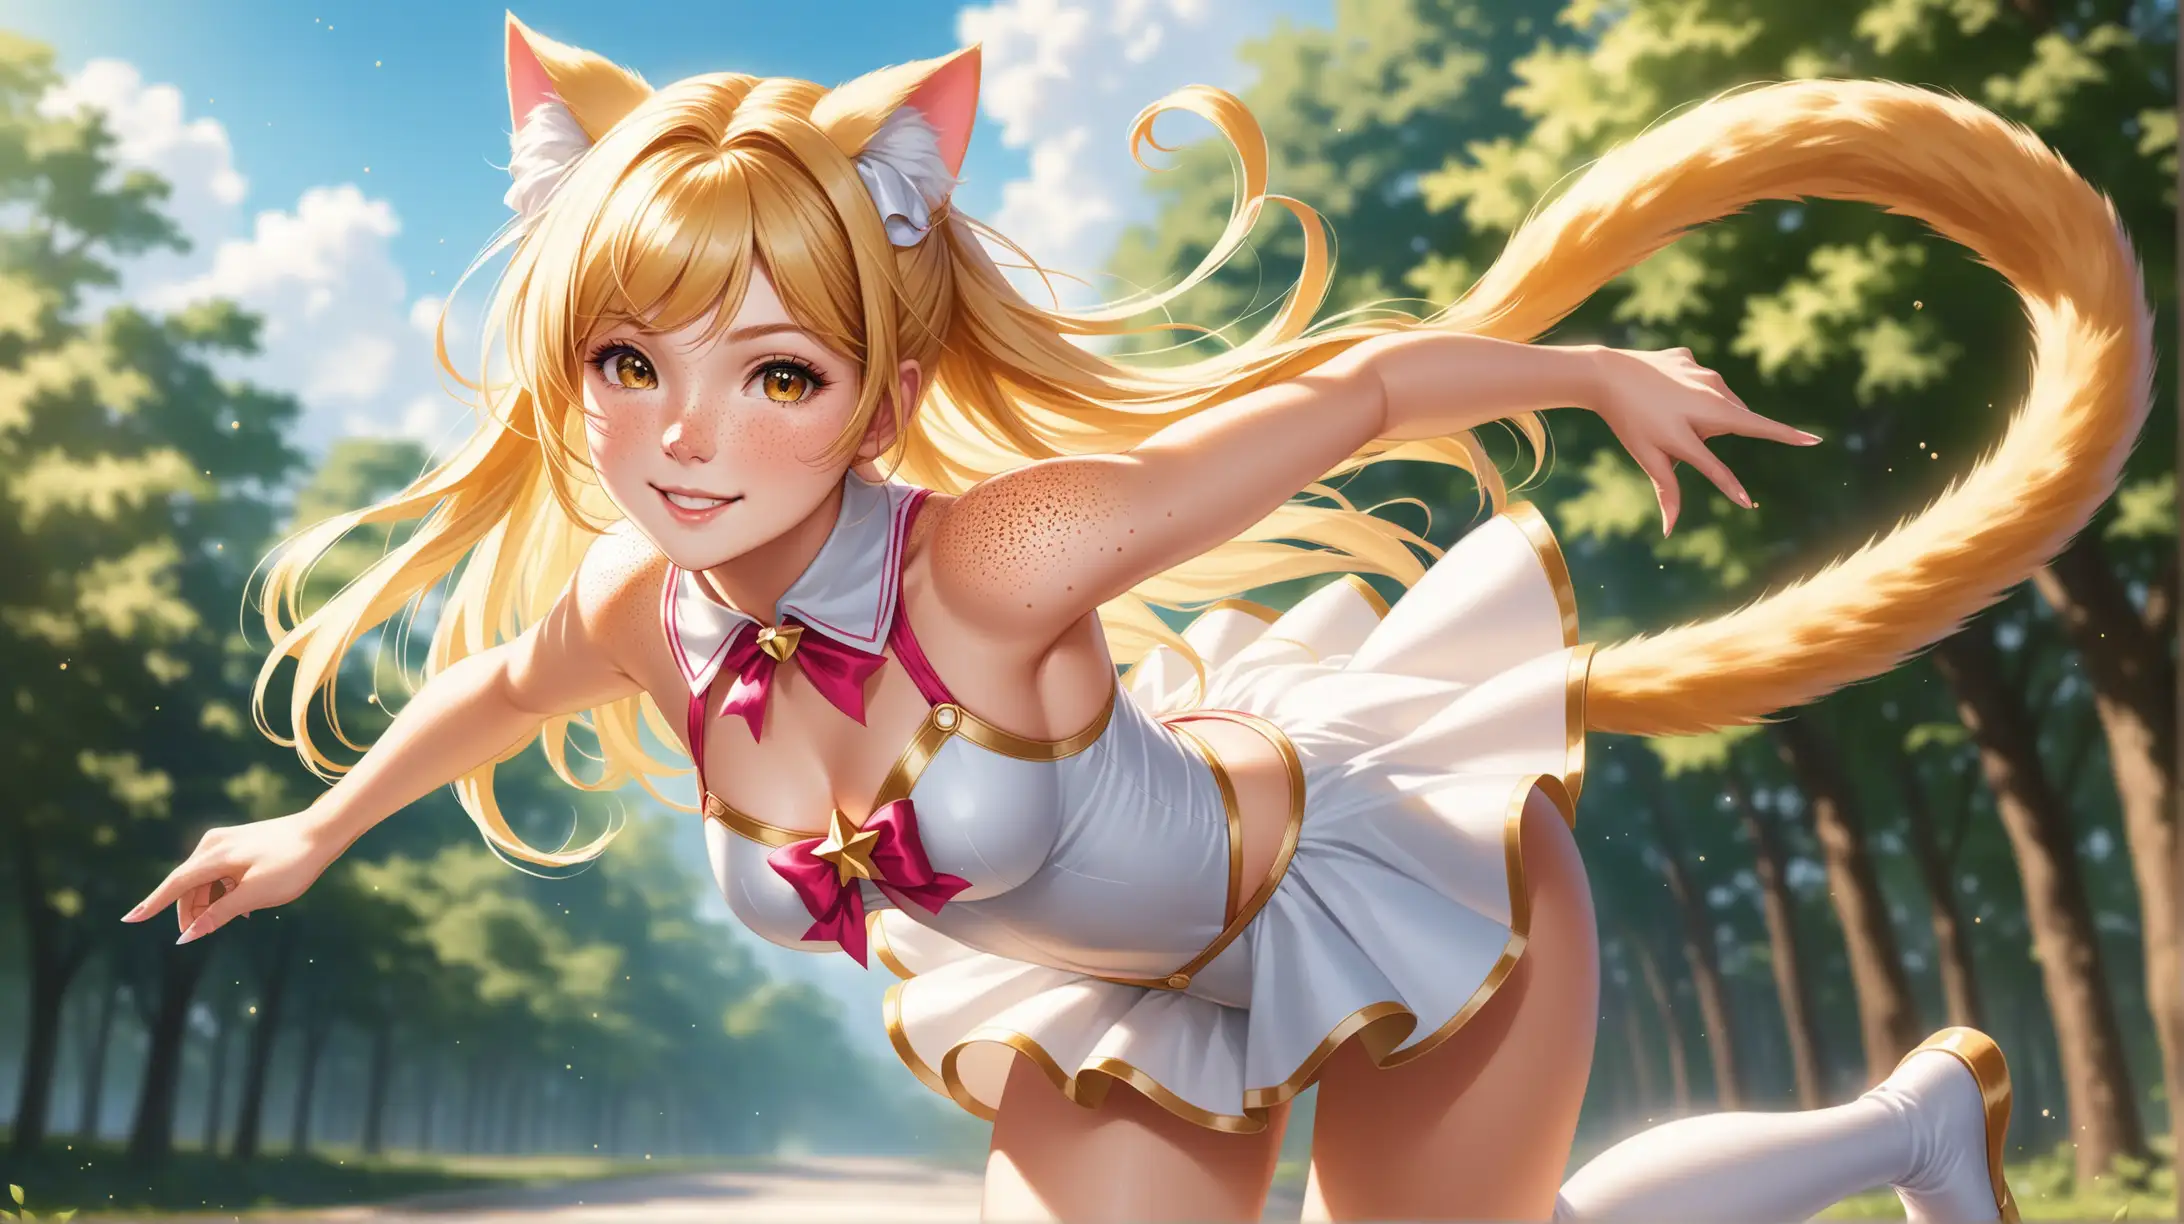 Draw a woman, long blonde hair in a bun, gold eyes, freckles, perky body, high quality, realistic, long shot, full body, outdoors, natural lighting, white magical girl outfit, cat ears and cat tail, pantyshot, dynamic pose, smiling toward the viewer